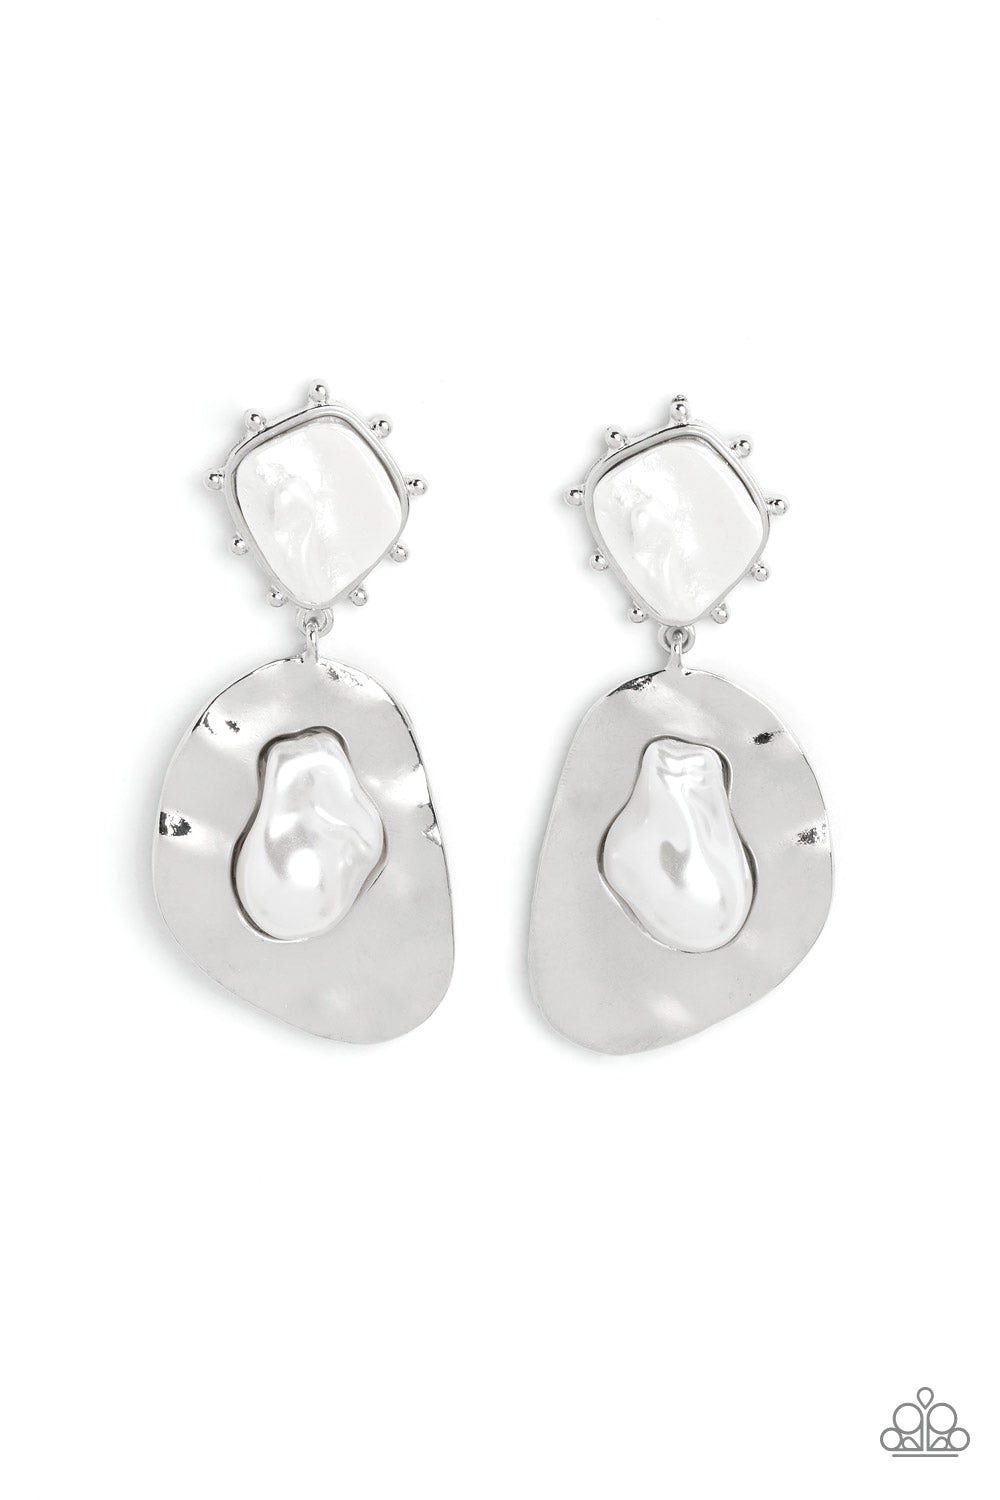 Paparazzi Accessories Rippling Rhapsody - White An oversized hammered, asymmetrical silver disc dangles from a more dainty, asymmetrical silver frame, accented with raised silver studs around its edges. Pressed in the center of the studded display, an abs